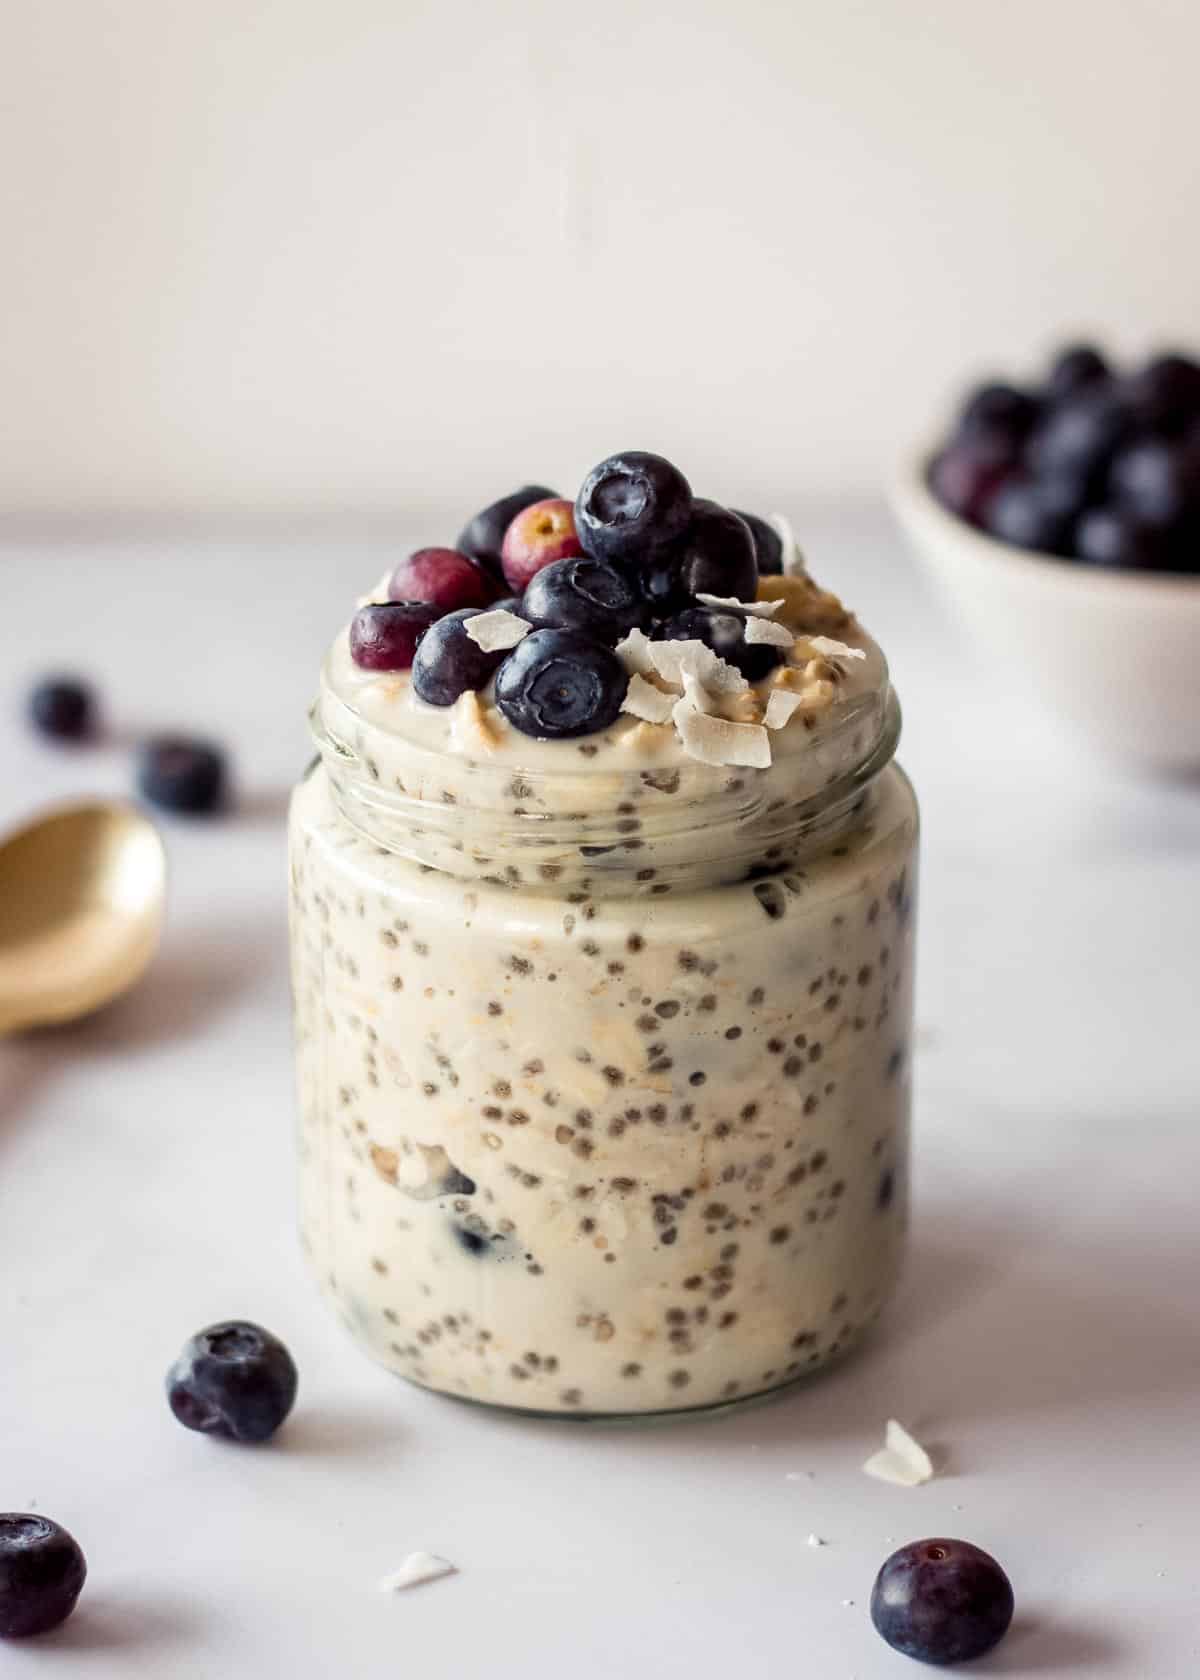 Glass jar of blueberry overnight oats topped with blueberries. There is a dish of berries in the background and a golden spoon off to one side.